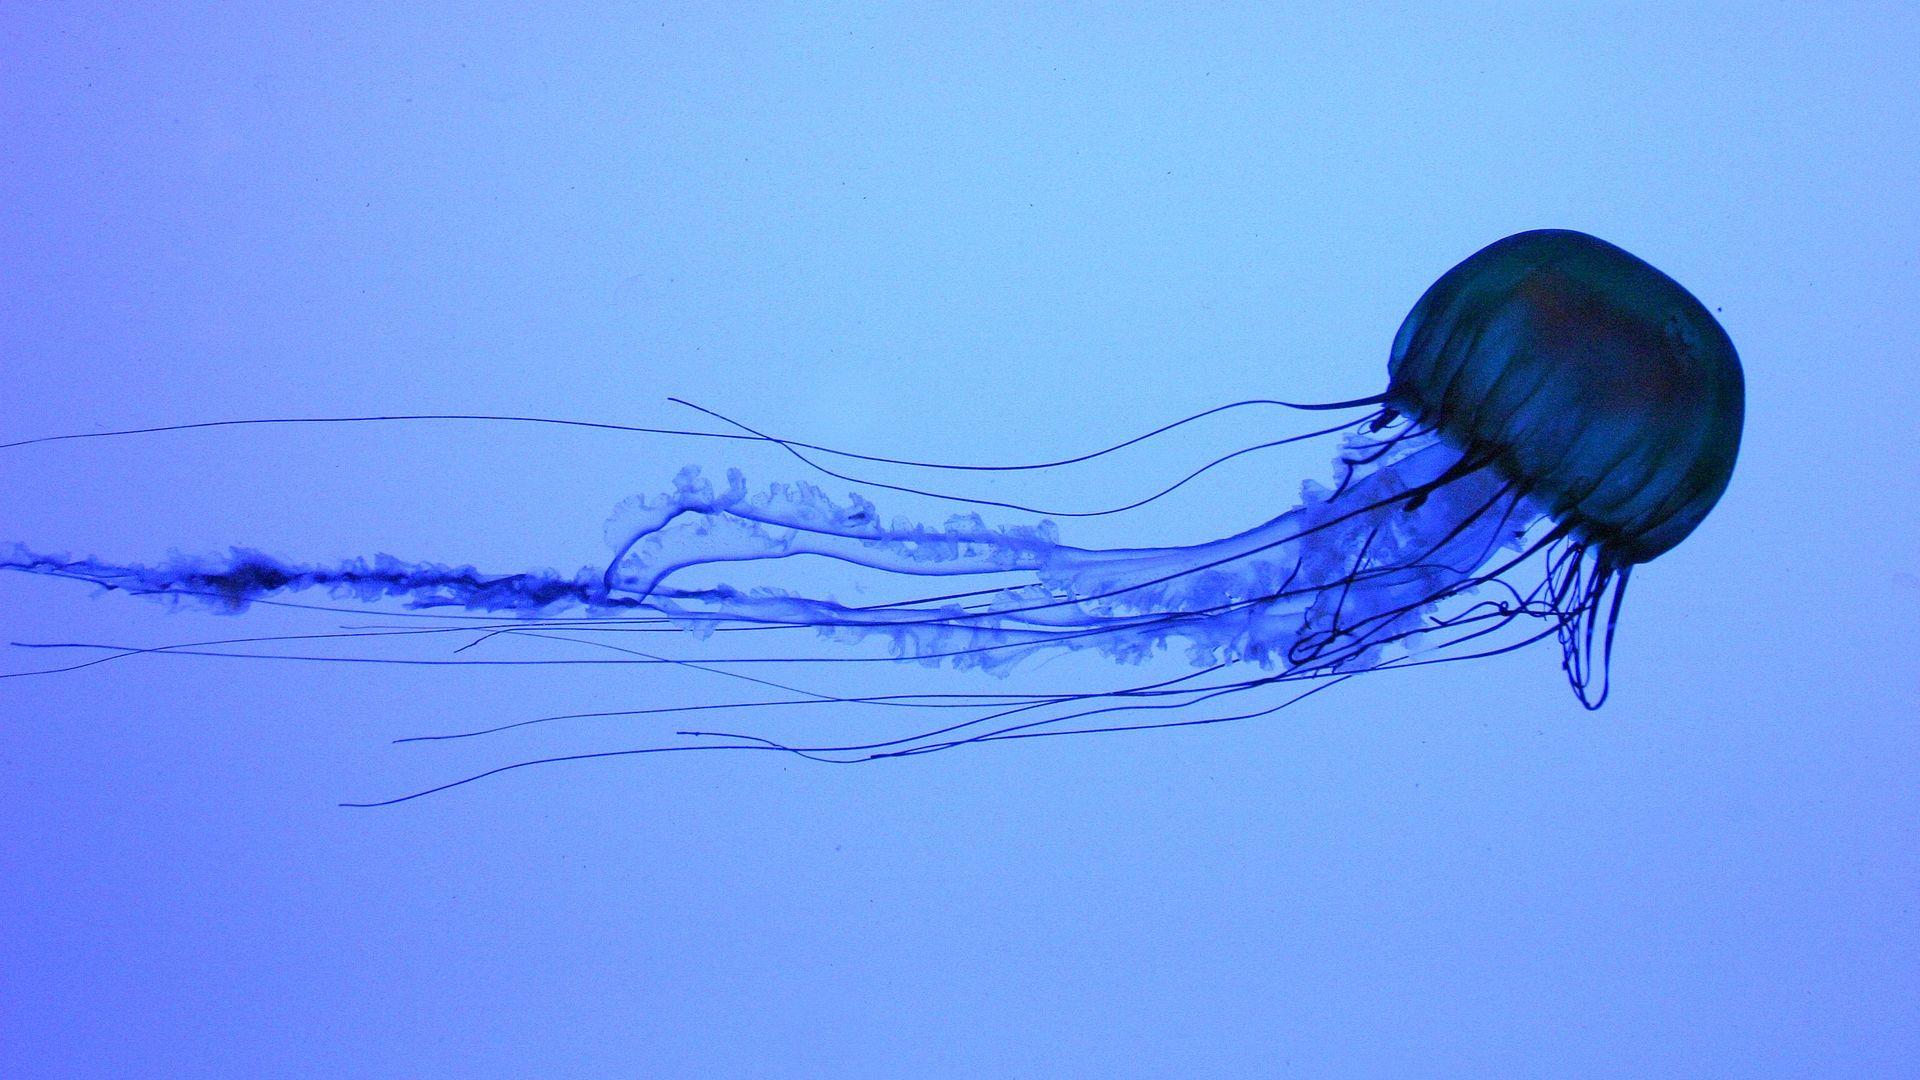 jellyfish. This is a JellyFish wallpaper. This JellyFish